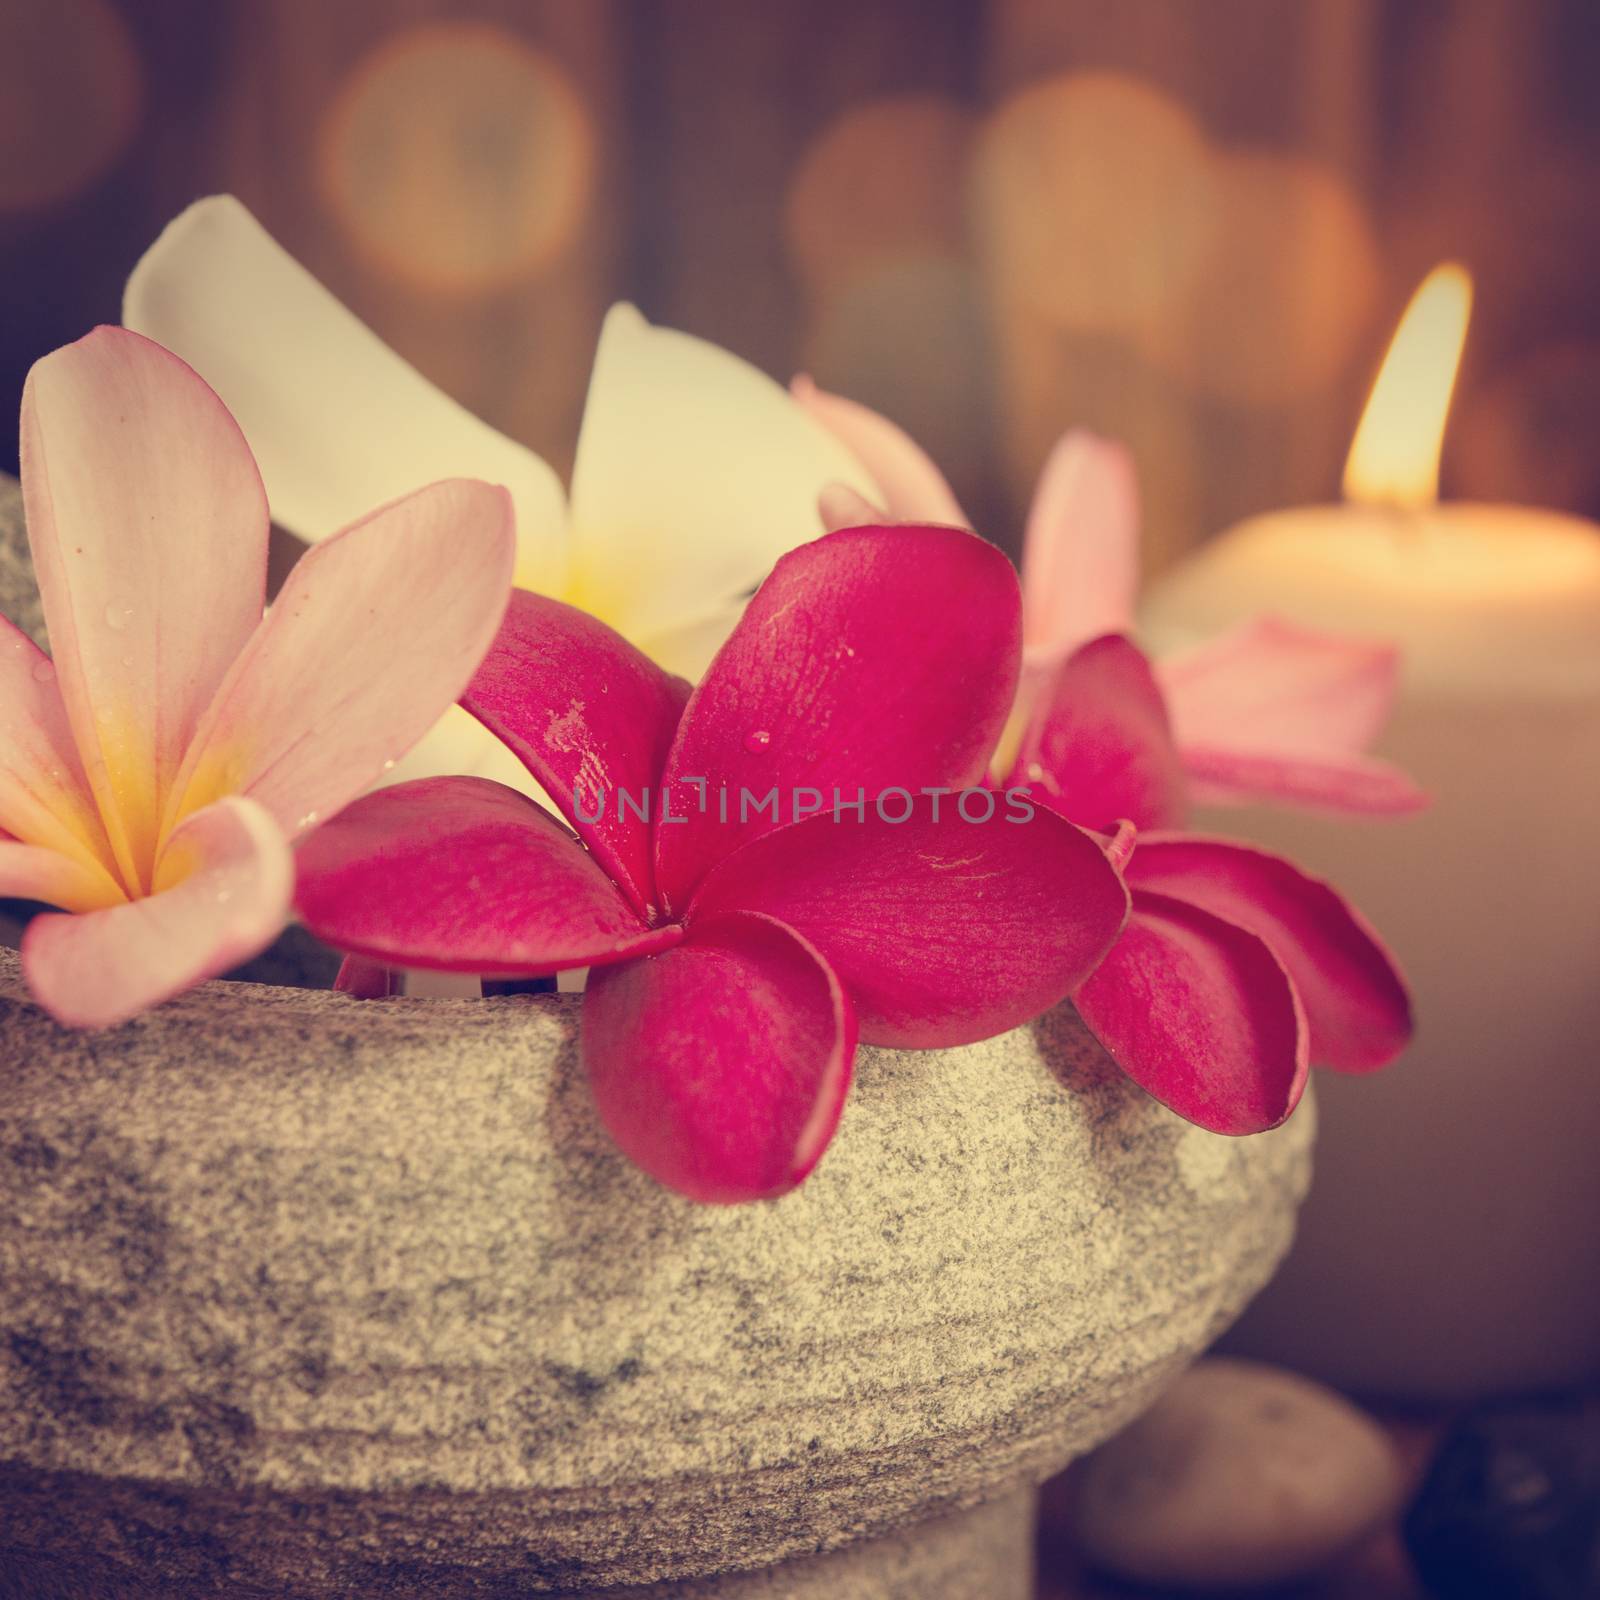 Spa still life setting with aromatic candles, frangipani flower, cold and hot stones in vintage retro style.